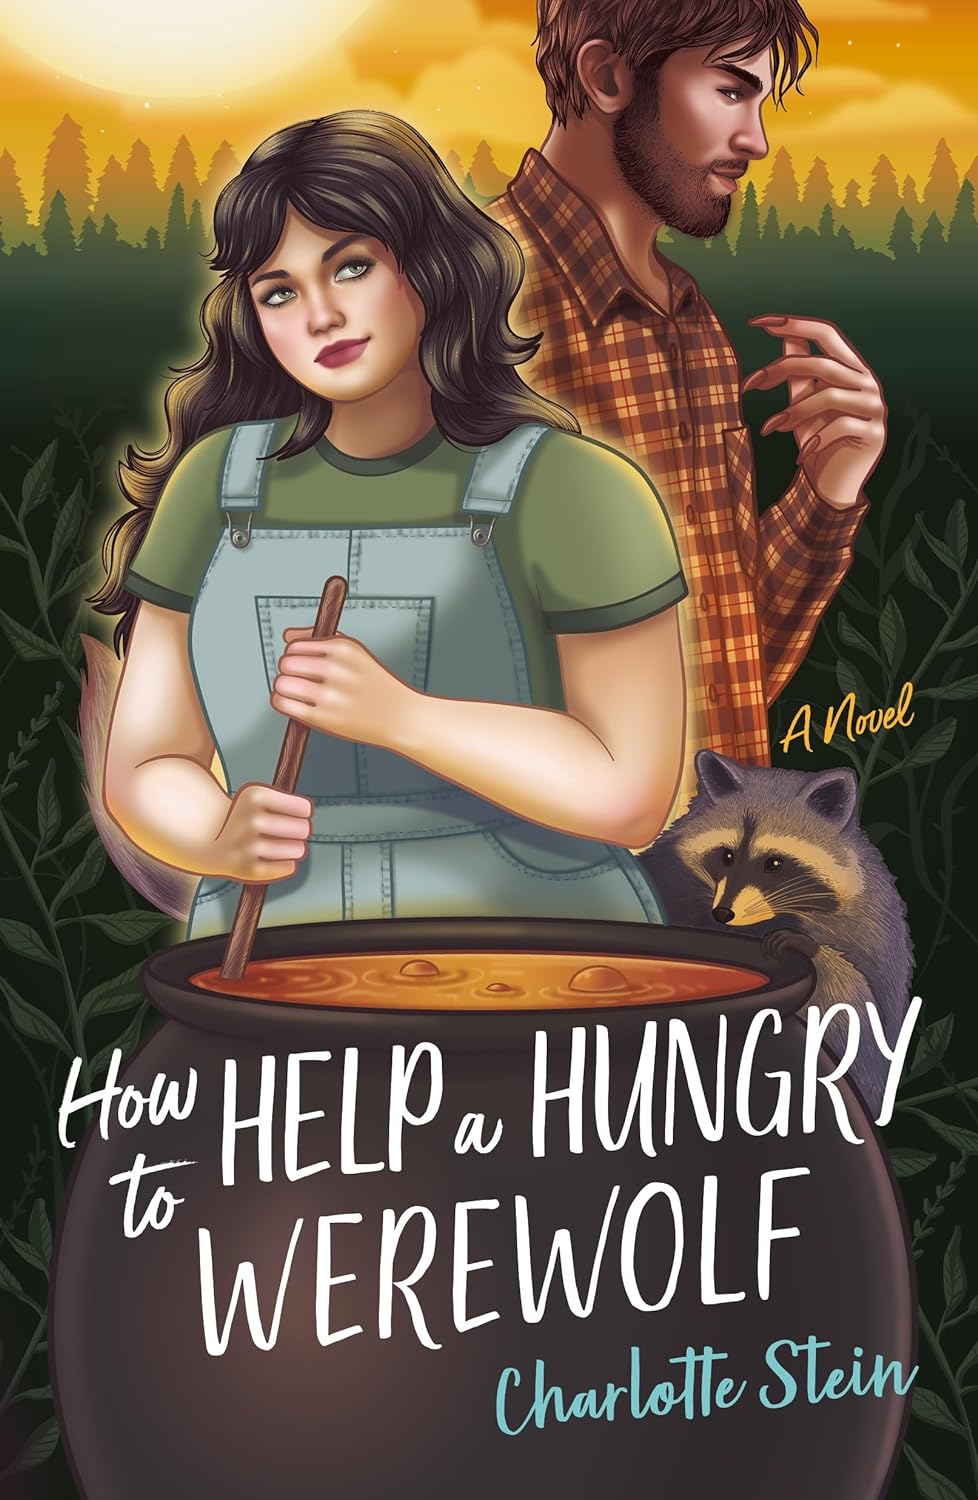 Quick RomWire Review – How to Help a Hungry Werewolf by Charlotte Stein (ARC)